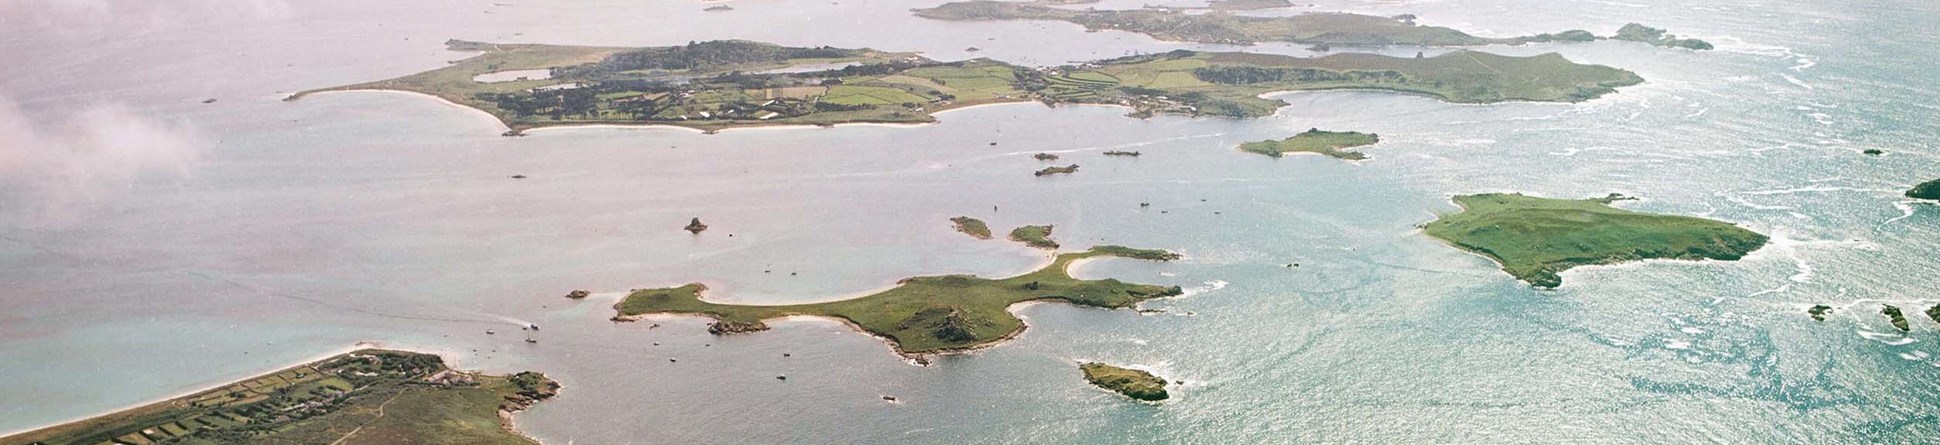 Aerial image of the Isles of Scilly.